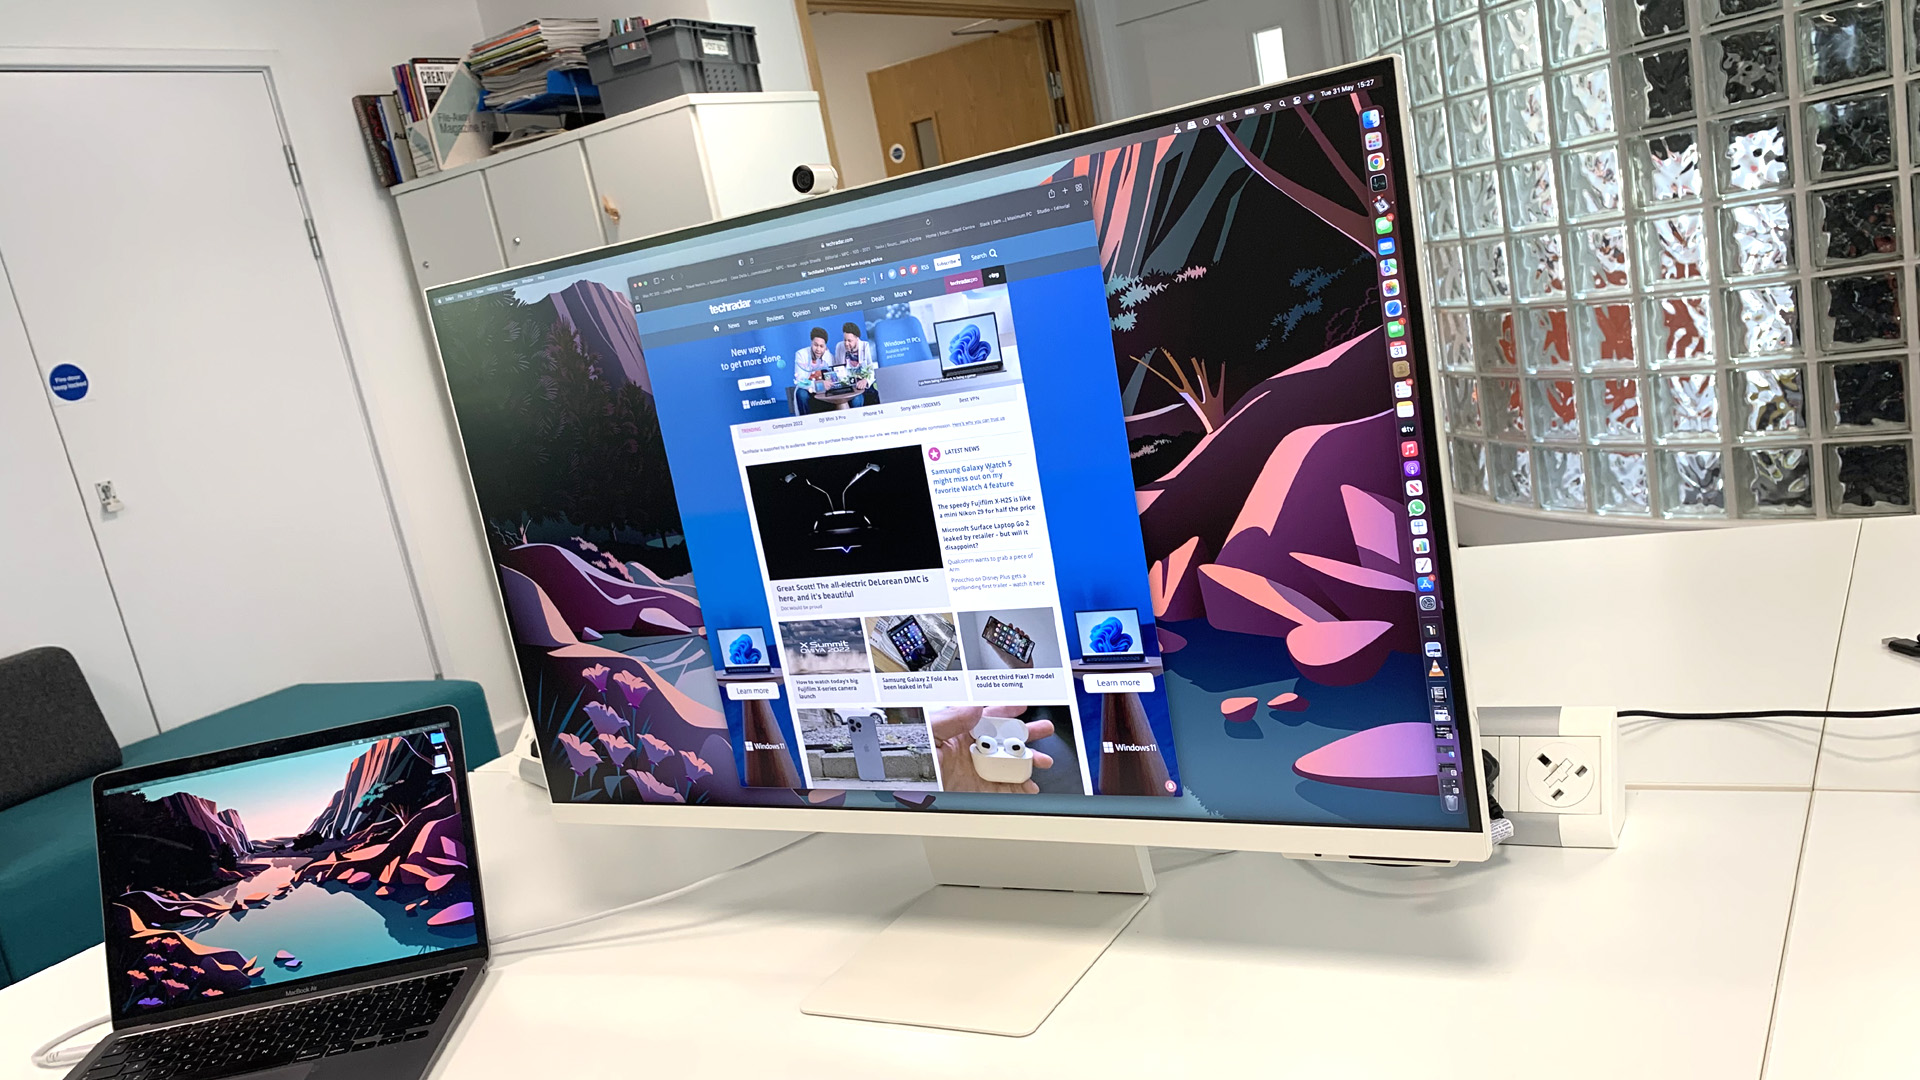 We tested the Samsung M8 Smart Monitor - it's the perfect TV for your desk